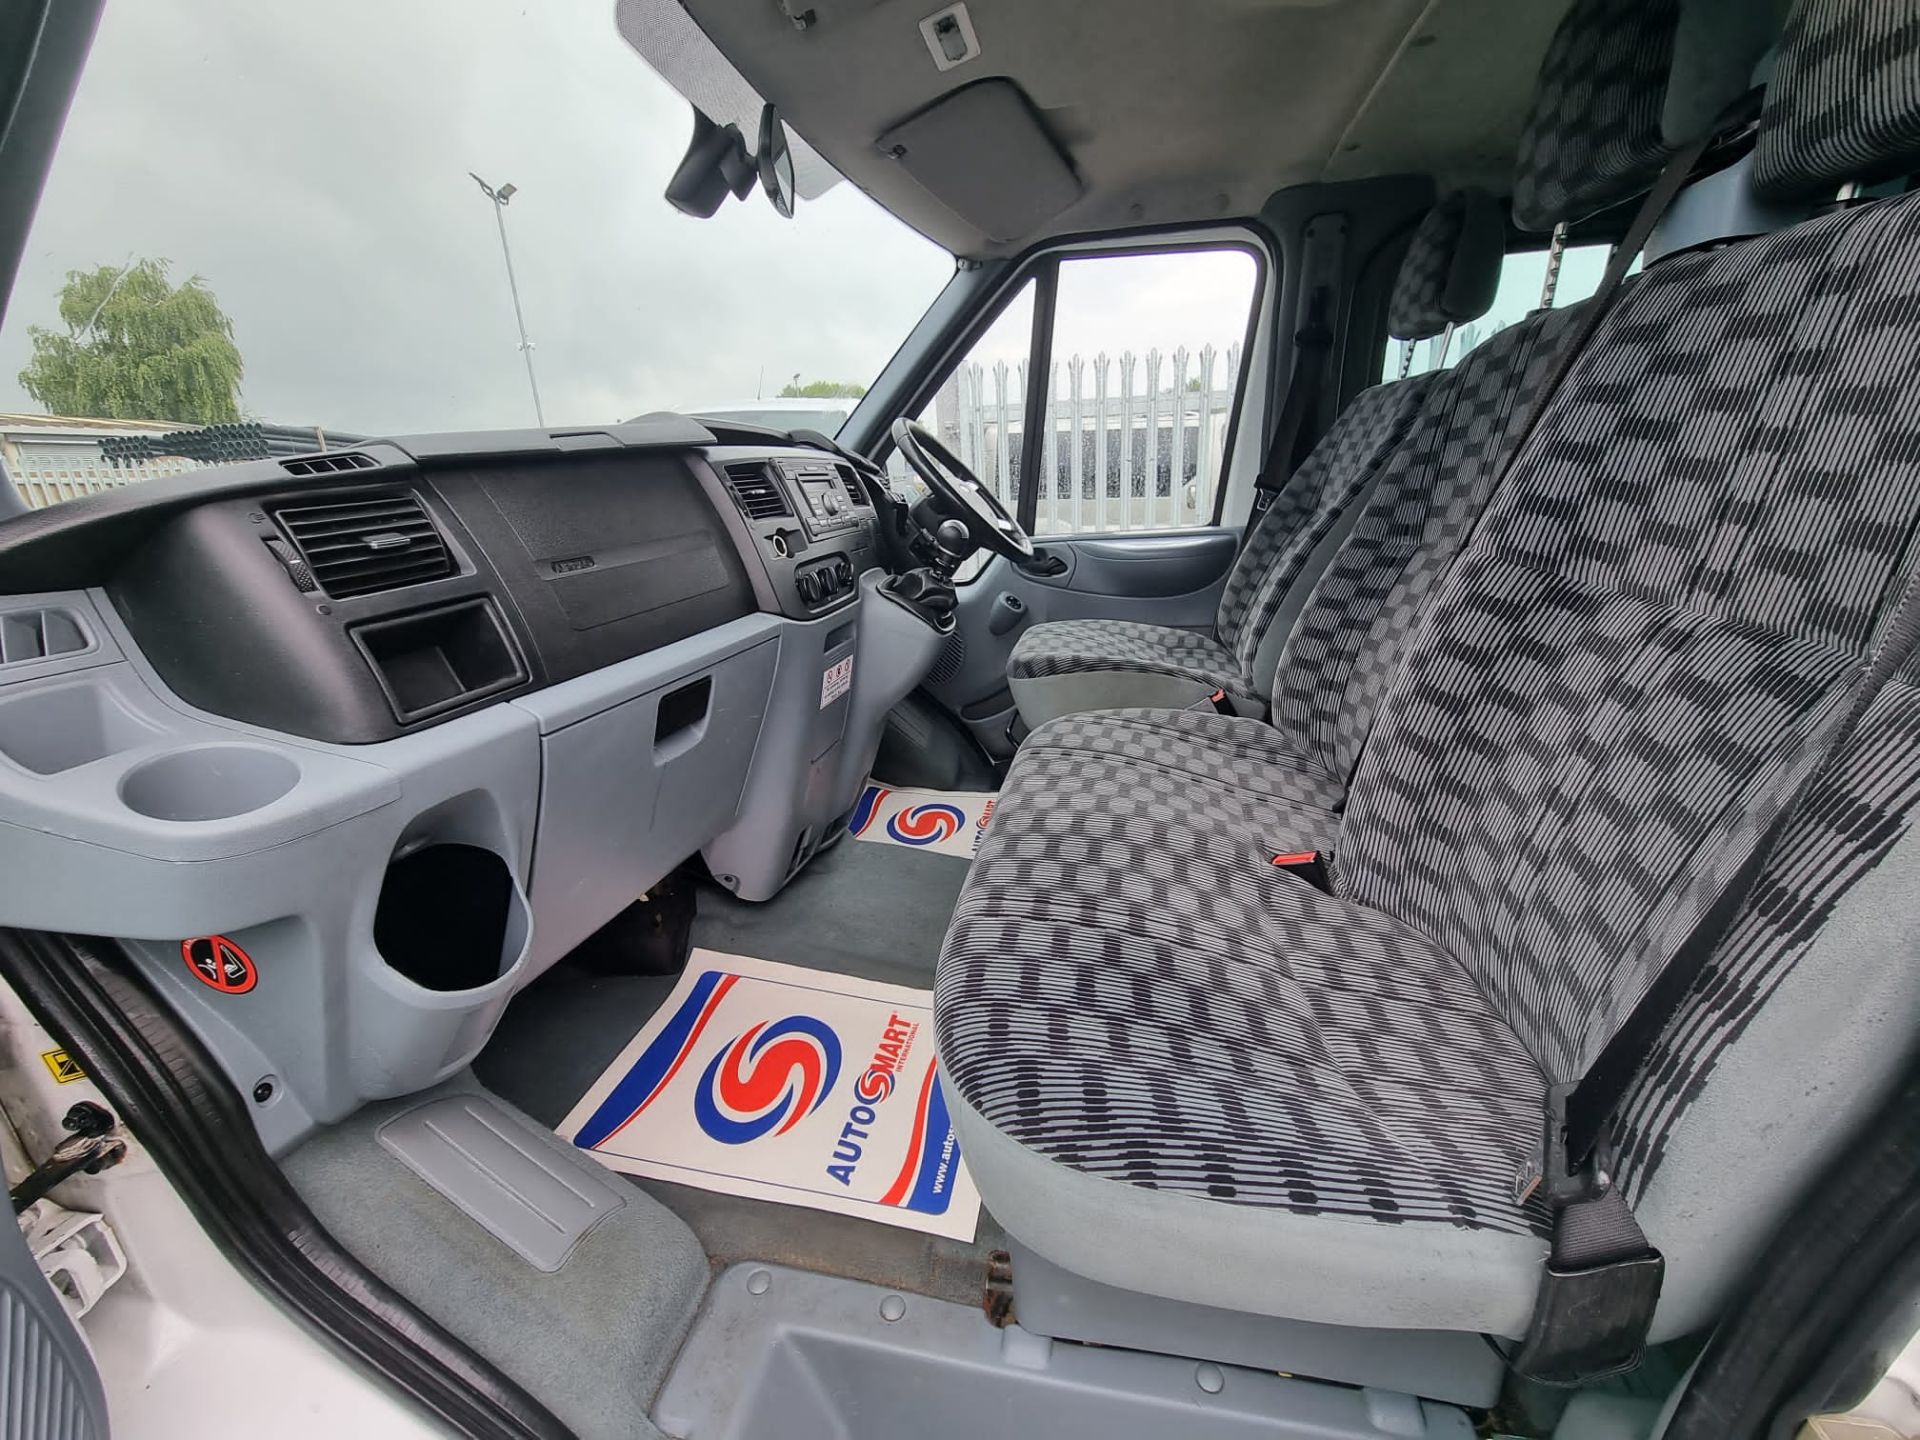 Ford Transit 2.2 Trend 2013 '13 Reg' 9 seats - Air Con - Cruise Control - Image 4 of 13